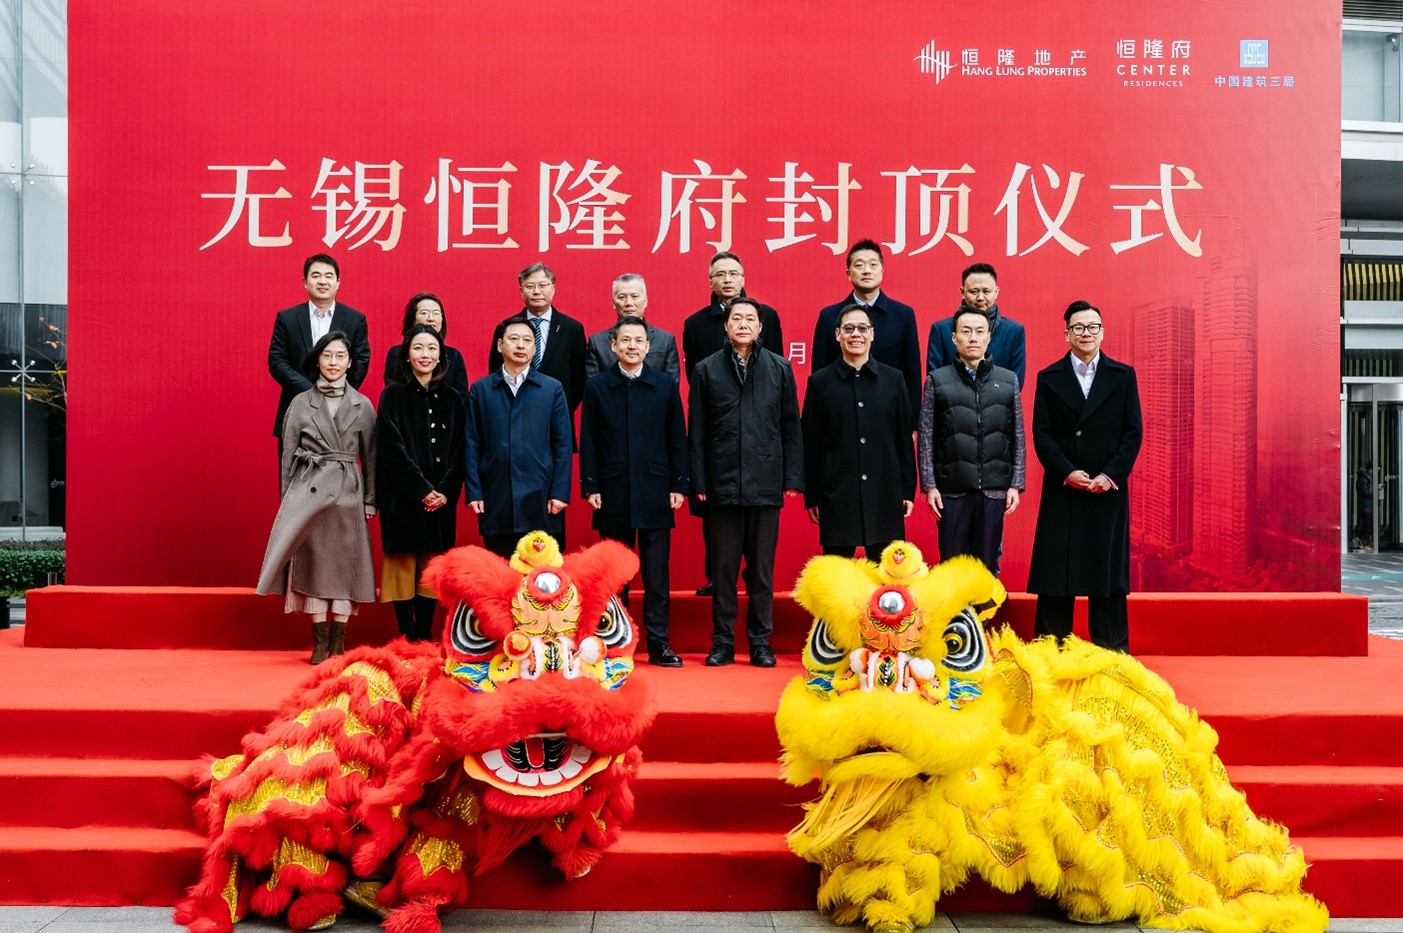 (First row) Mr. Louis Tong, Deputy Director – Project Management (4th from the left); Mr. Tsz Chuen Cheng, Deputy General Manager – Project Management (3rd from the right); Ms. Doris Poon, Deputy General Manager – Center 66 in Wuxi (2nd from the left); Mr. Zi Chuan Zhou, Deputy Secretary of Liangxi District in Wuxi and District Mayor (4th from the right); Mr. Da Yan Xia, Executive Deputy Director of East China Sub-bureau of China Construction Third Engineering Bureau (3rd from the left) and (Second row) Mr. Guo Ning Liu, Secretary of the Party Committee and General Manager of China Construction Third Engineering Bureau Group (East China) (1st from the left), officiate the topping out ceremony of Center Residences in Wuxi